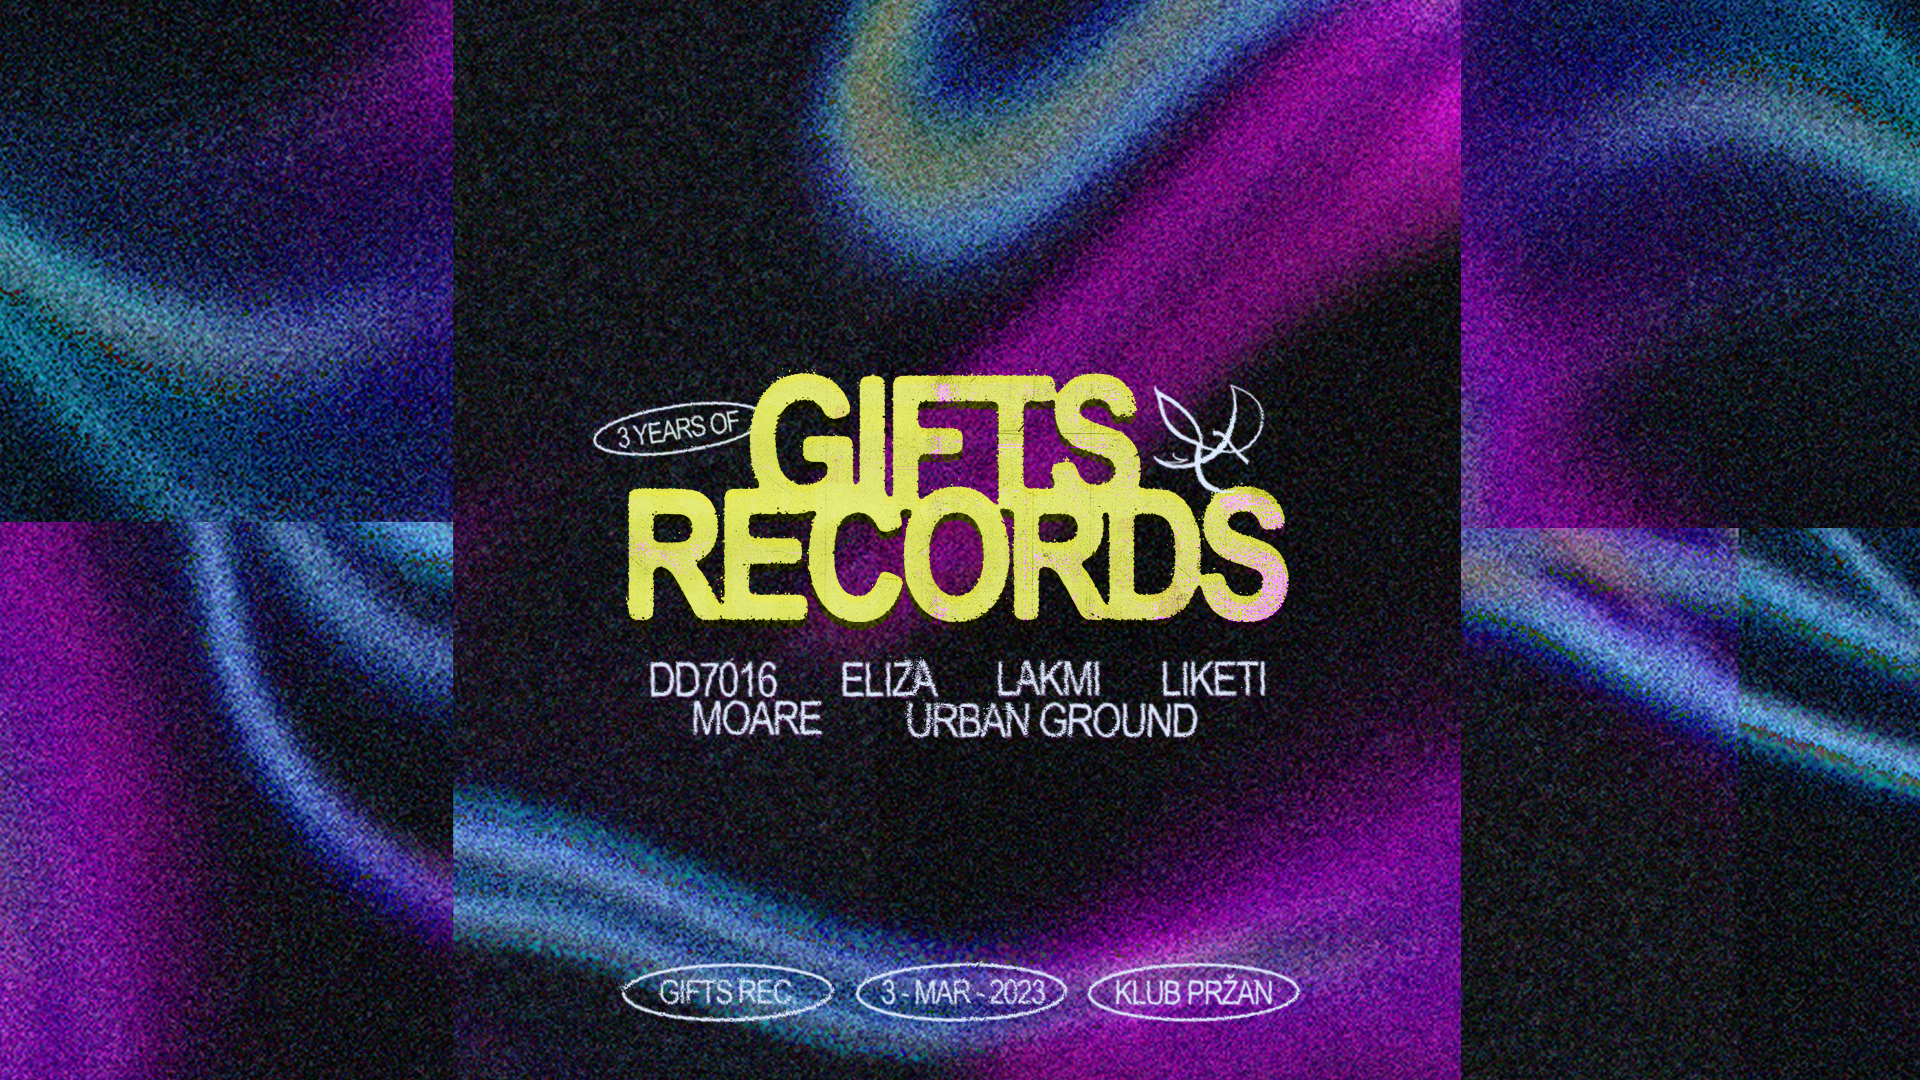 3 years of Gifts Records - フライヤー表